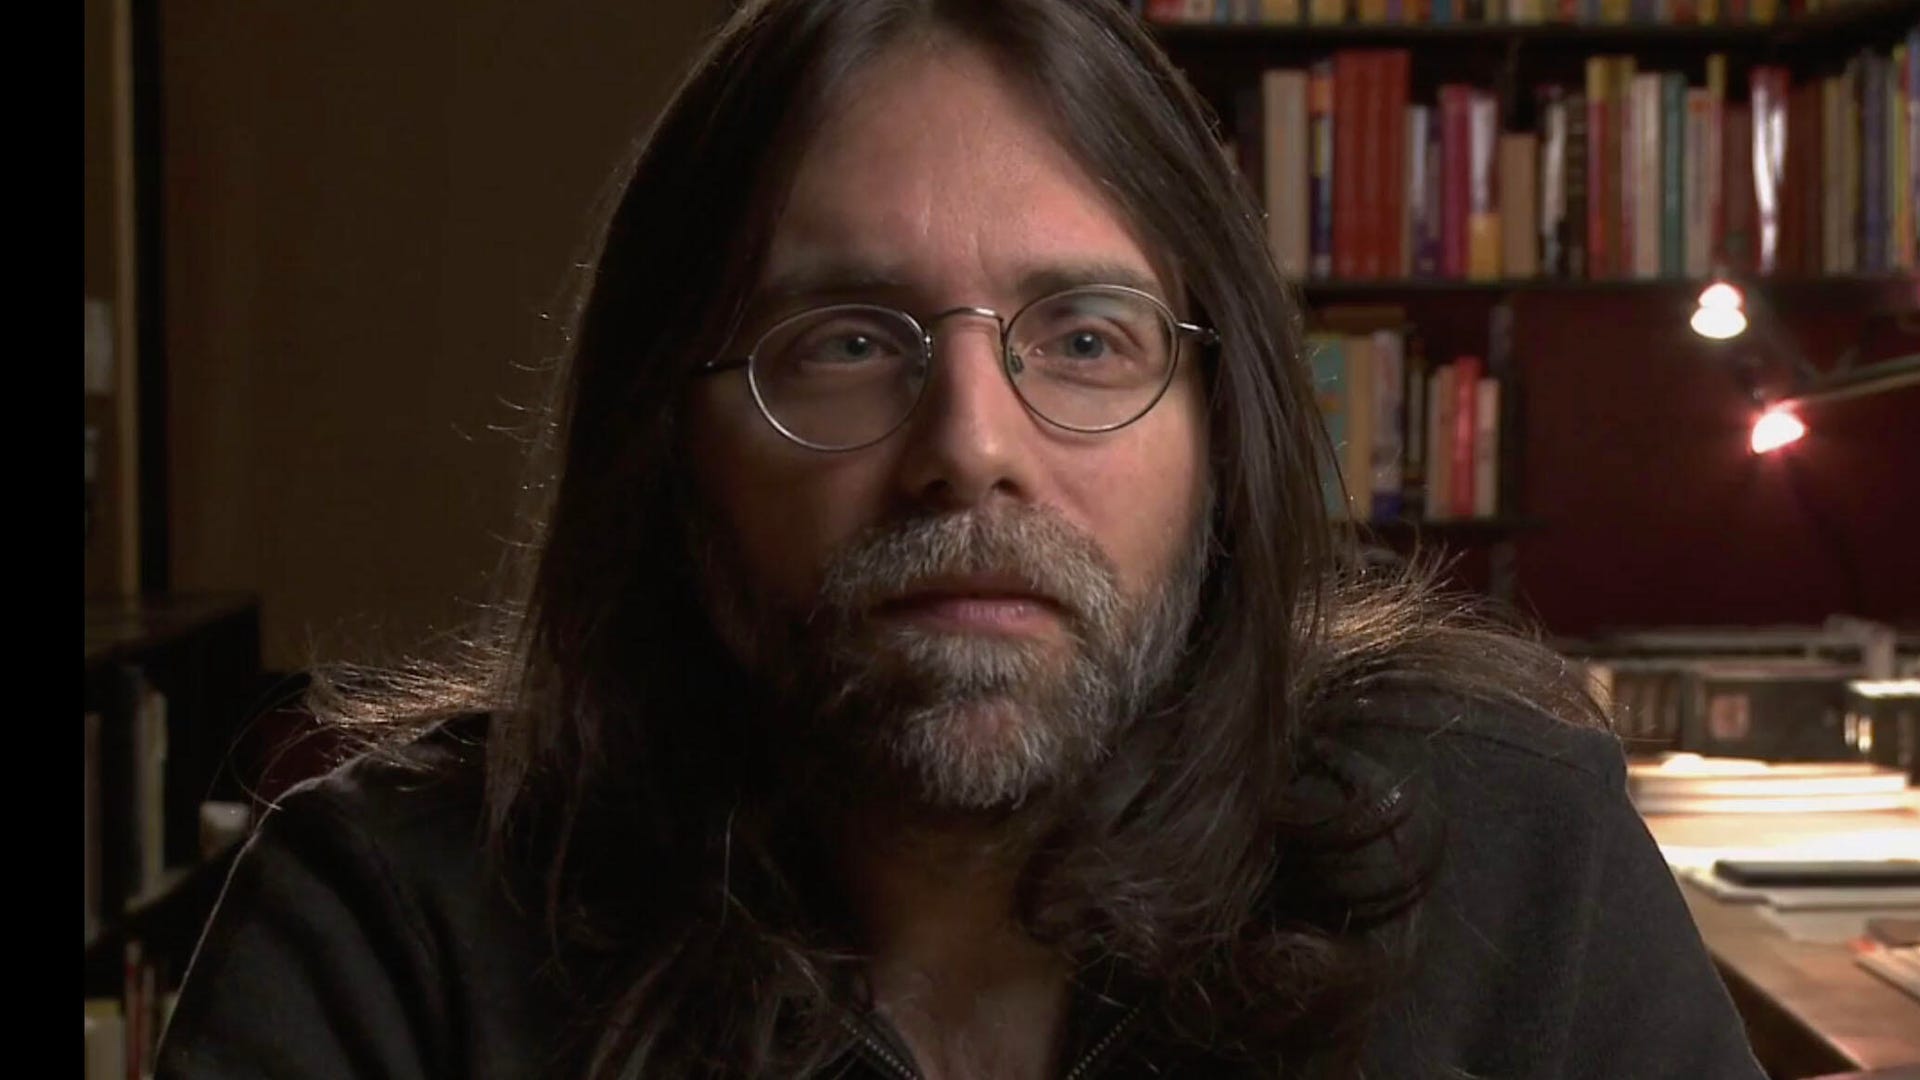 NXIVM leader Keith Raniere, shown in an episode of HBO's docuseries The Vow